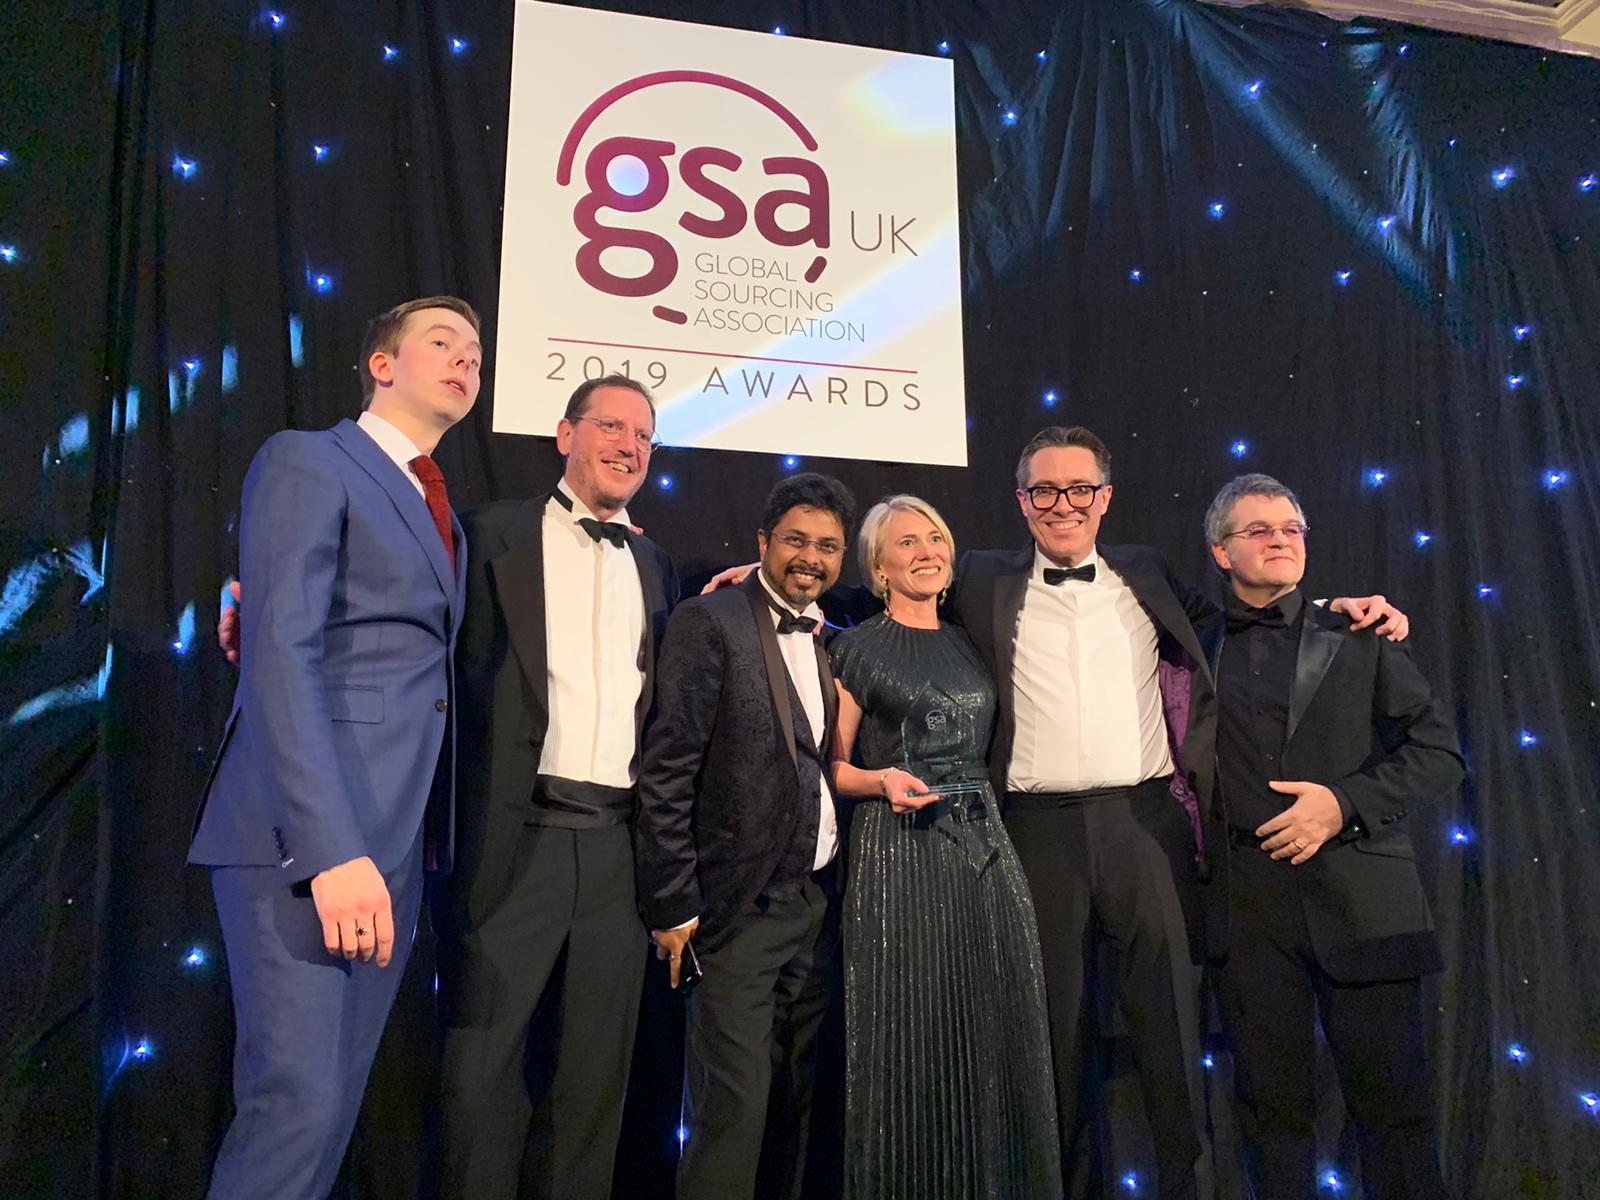 Helping our client, Nuveen, win an award at the Global Sourcing Association UK Awards 2019!